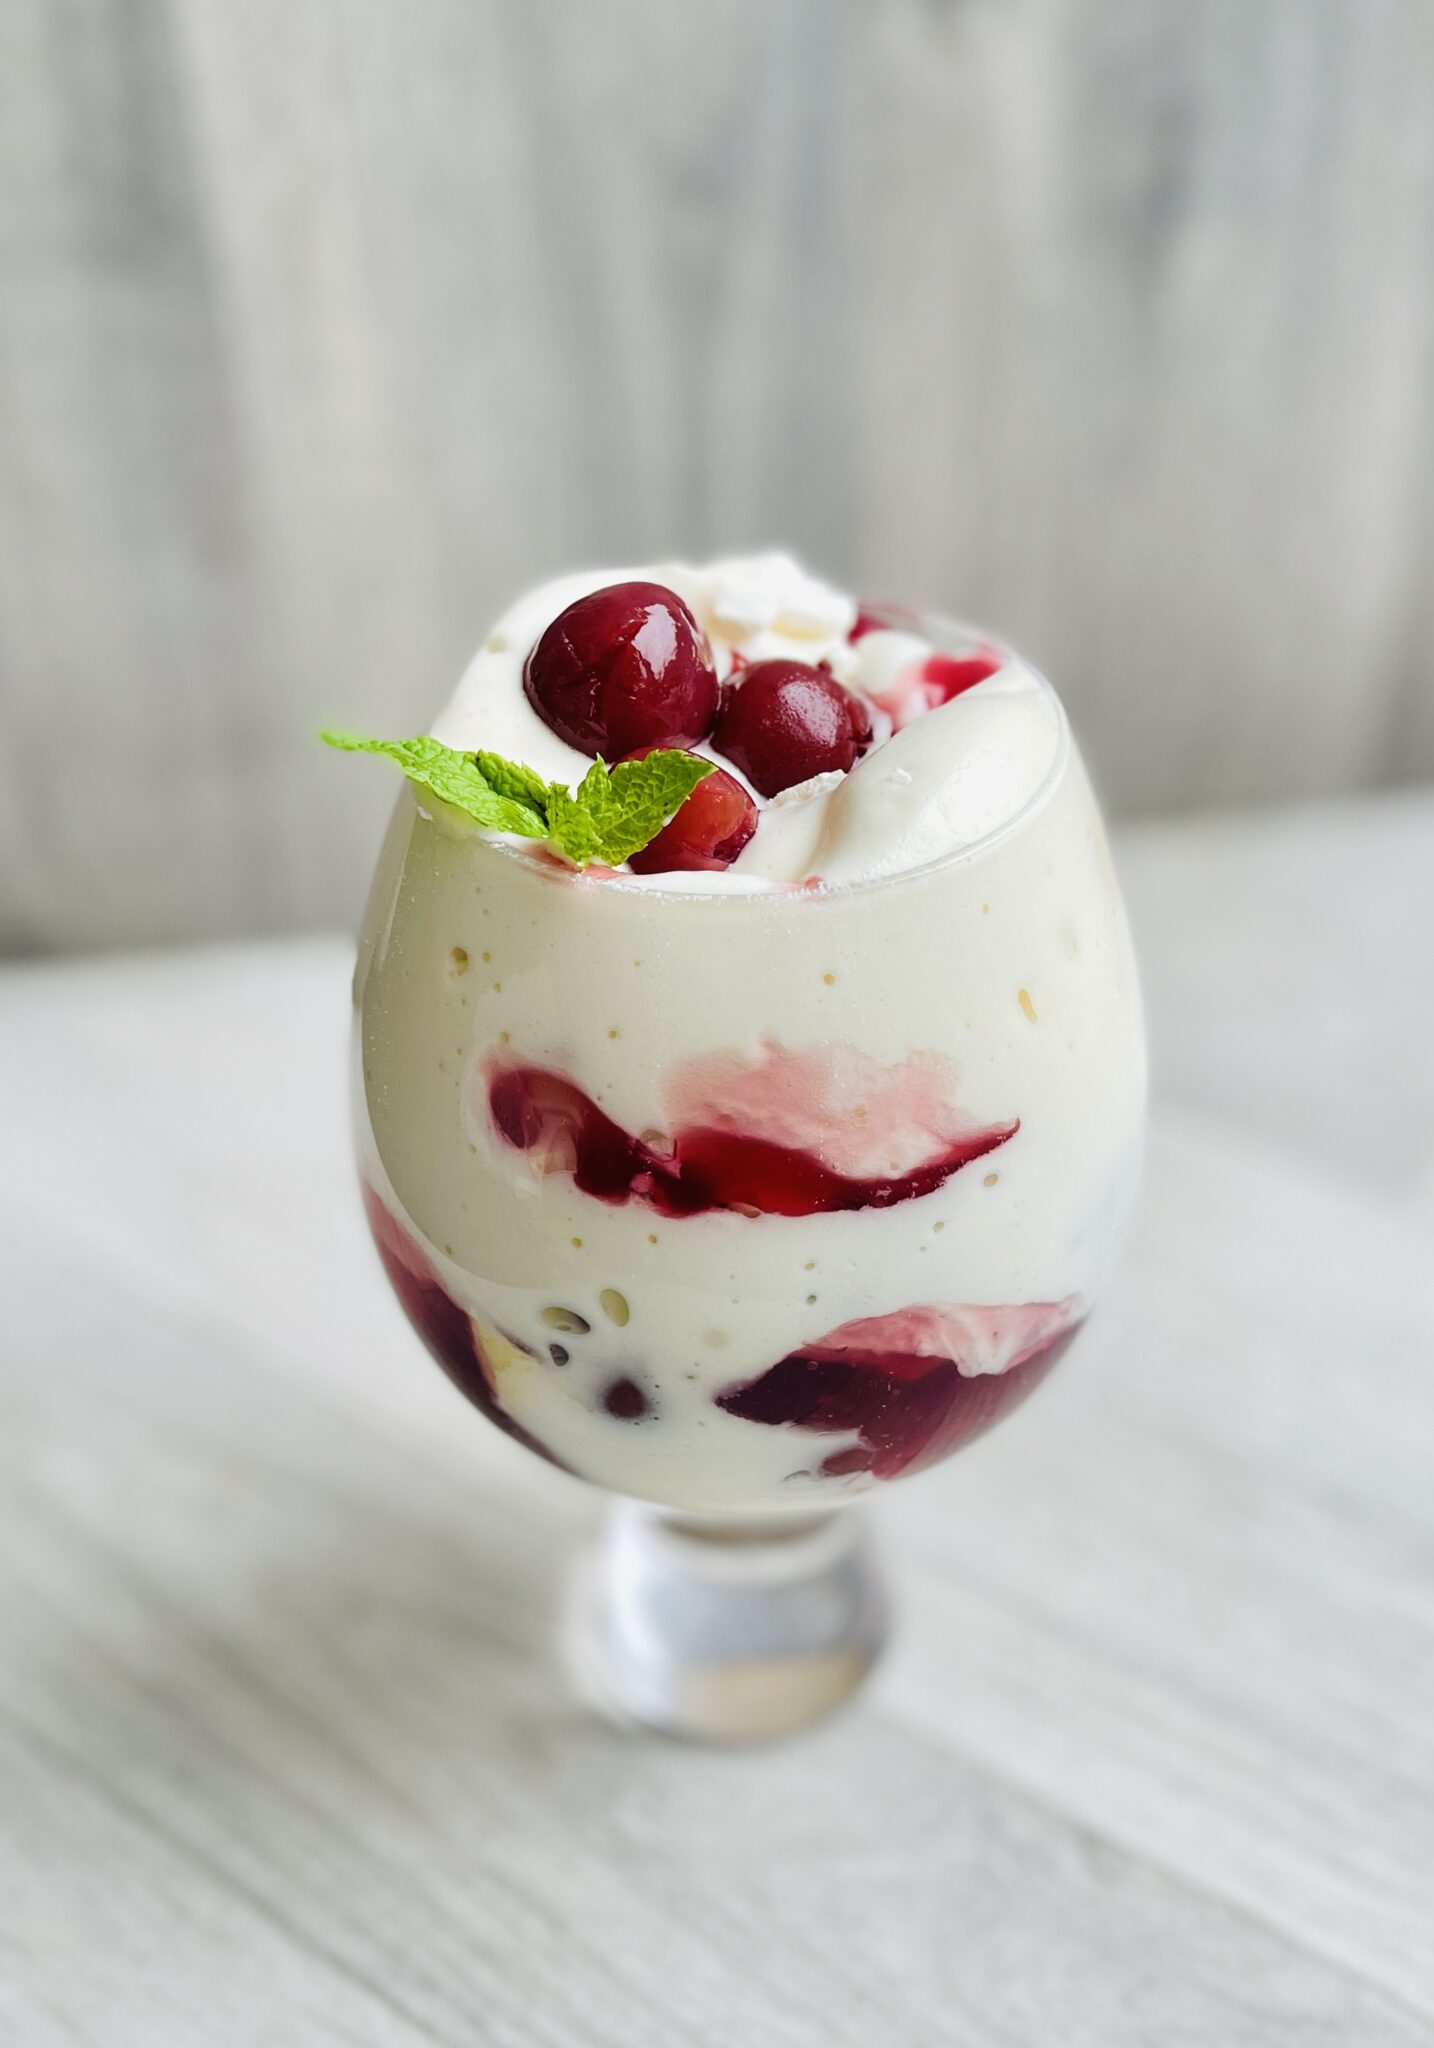 Cherry Eton Mess by Theo Michaels - Canned Food UK